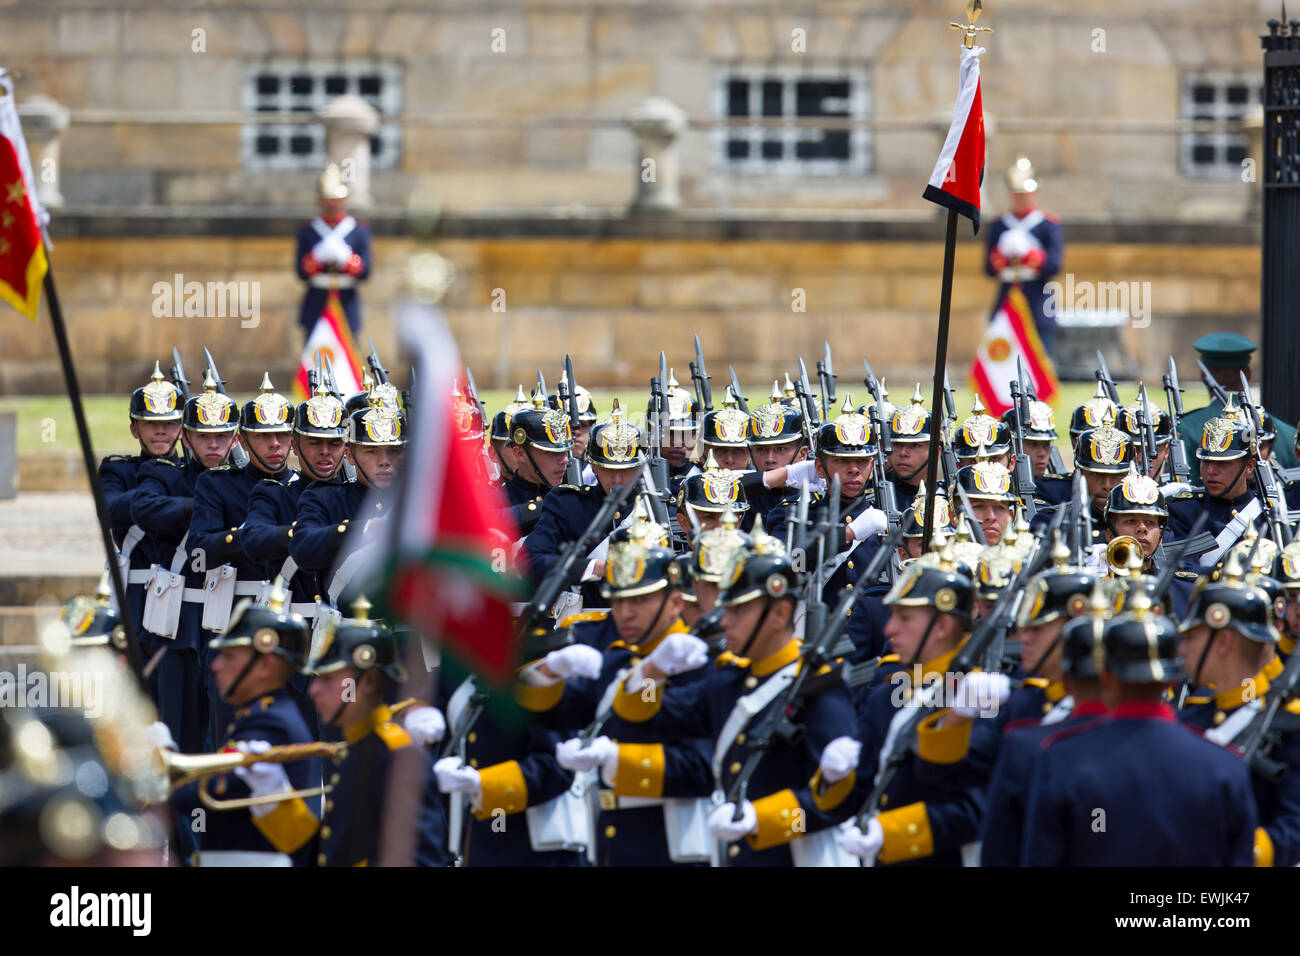 The ceremonial guard and marching military band arriving at the President's residence in Bogota, Colombia Stock Photo